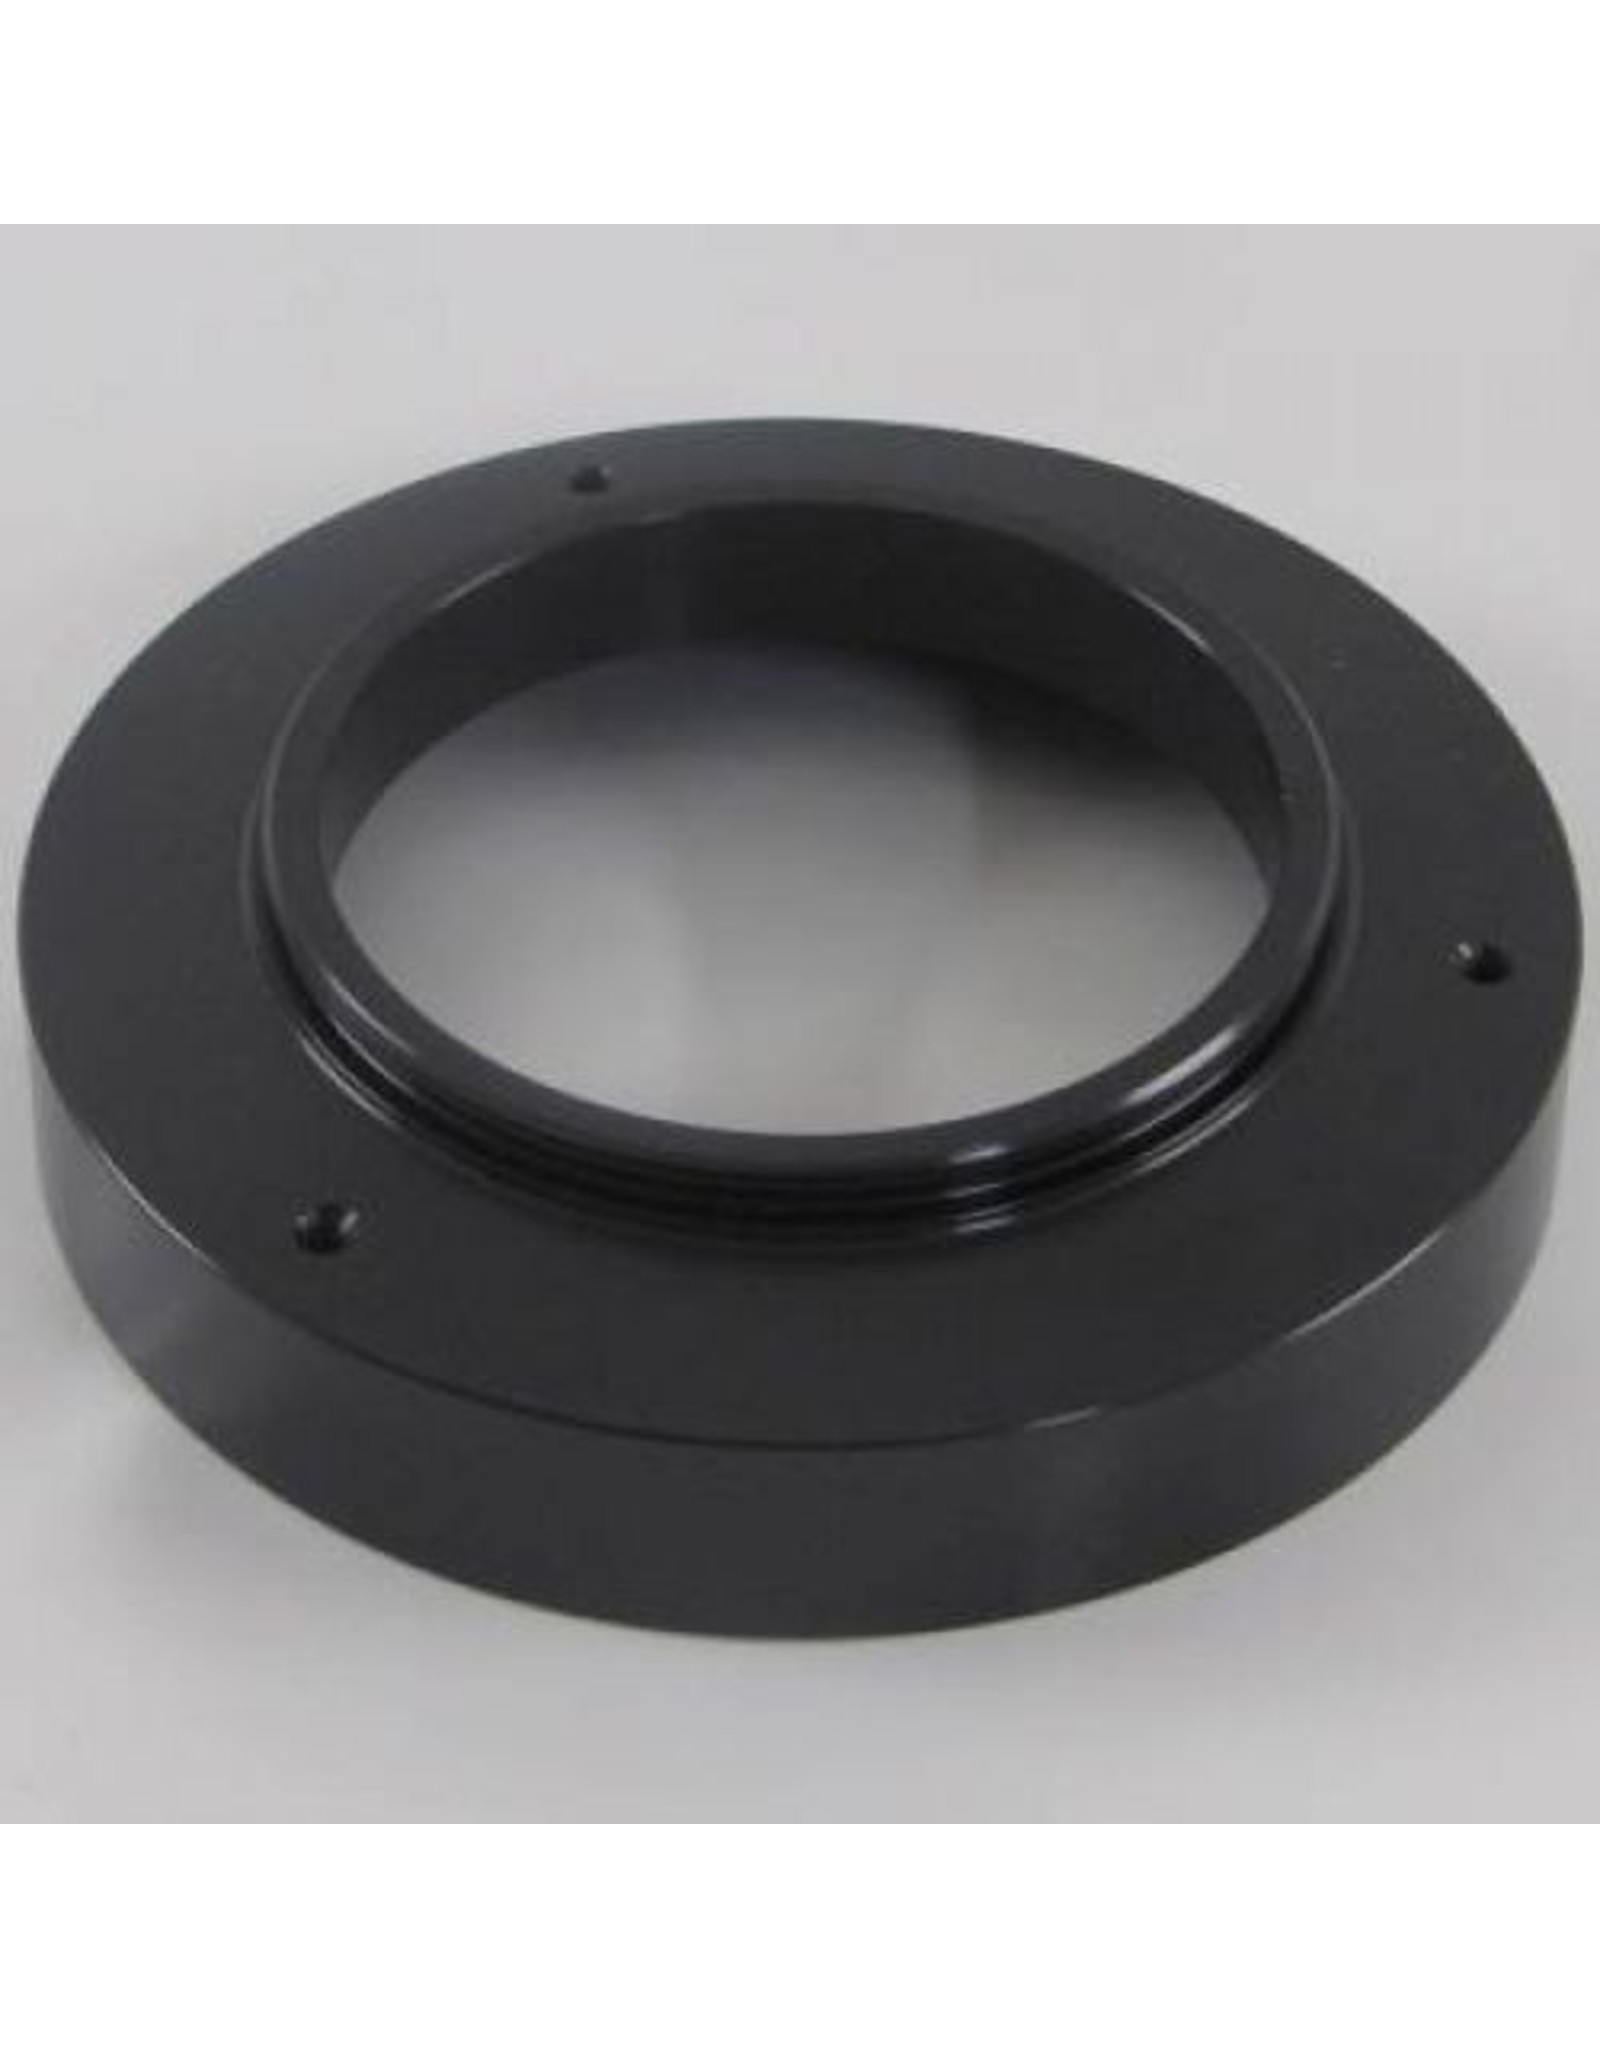 Feathertouch Feather Touch EC30-1905-12---End Cap 3.0 for SBIG and FLI 5 series/CCD Camera & Filter Wheels*